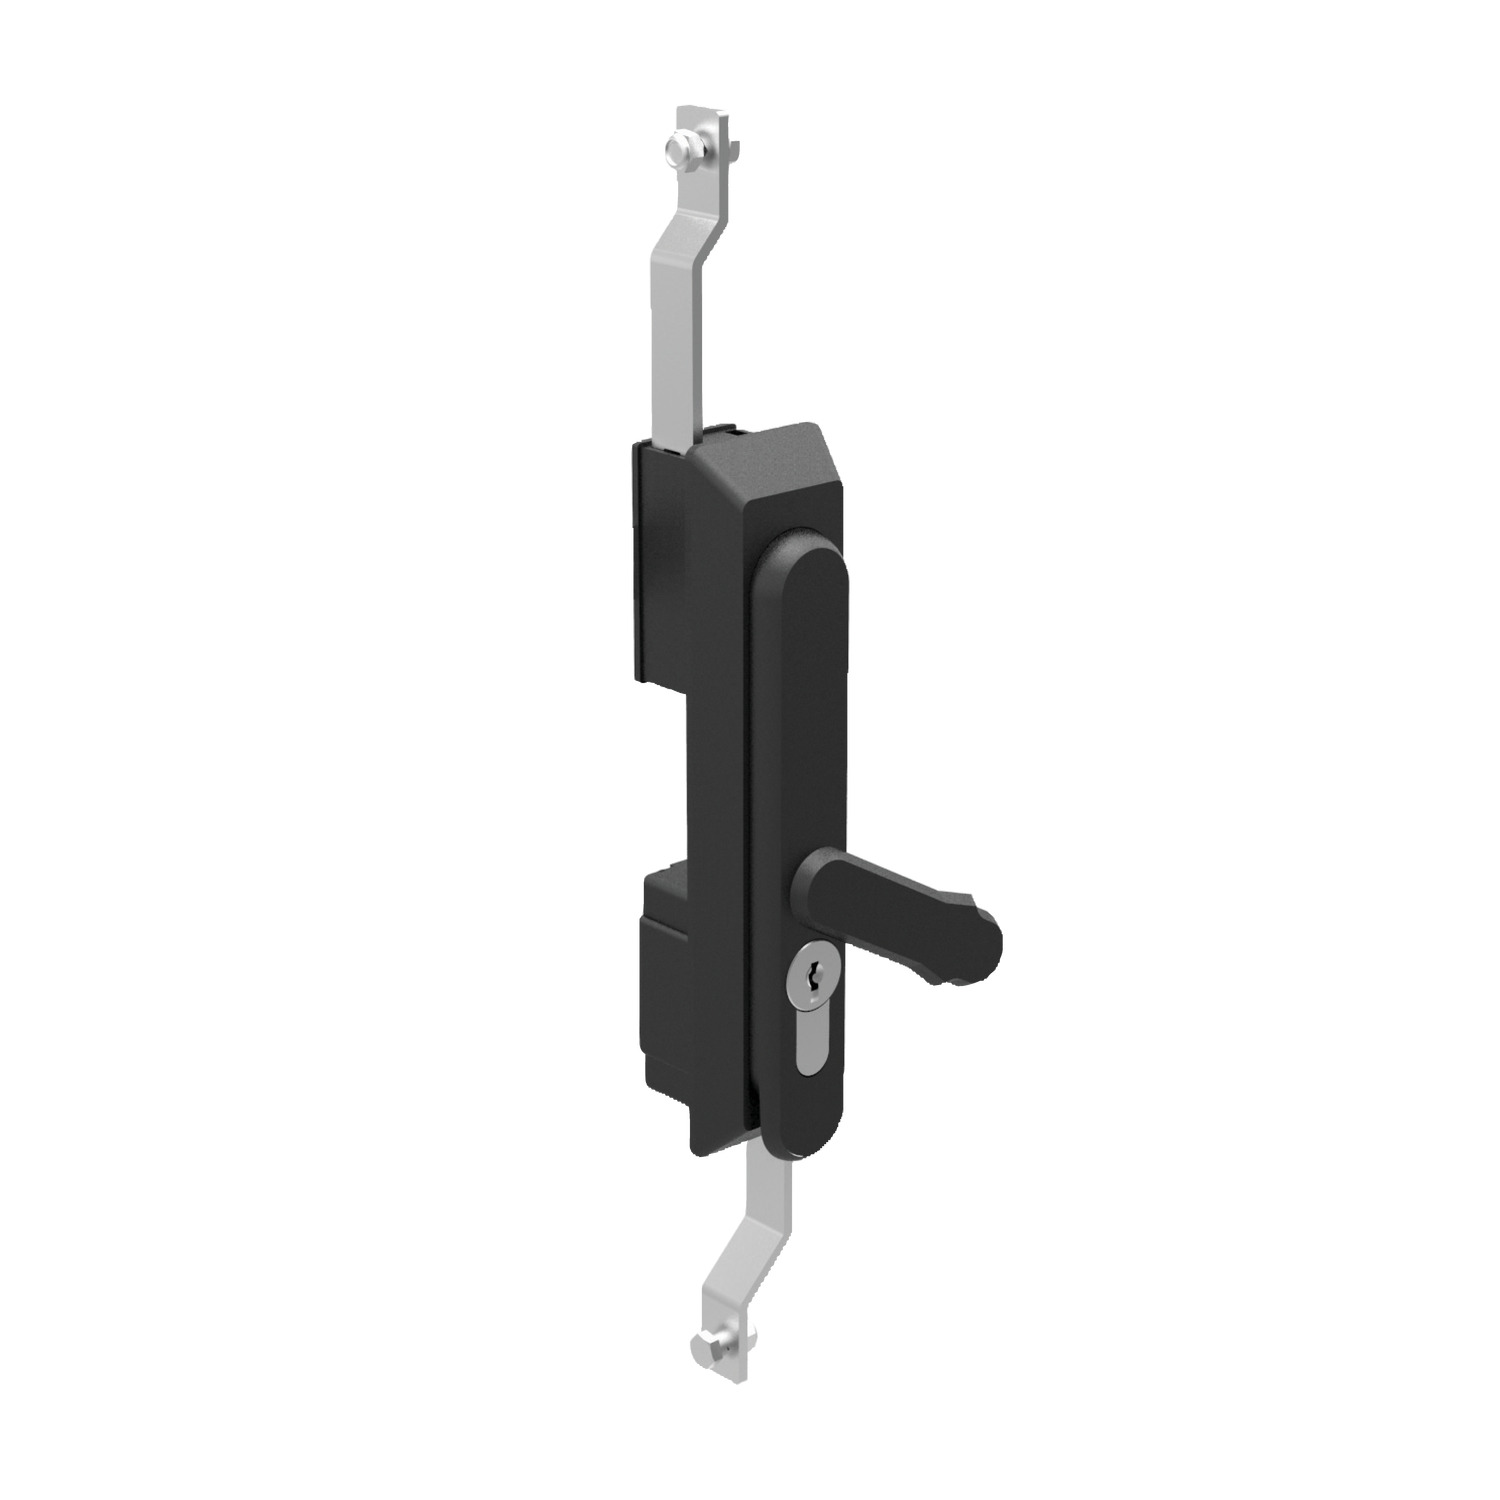 Swing Handles - with Rod Control The rod control system on this swing handle provides easy multi point latching, making it ideal to secure larger enclosures such as IT enclosures such as server cabinets 